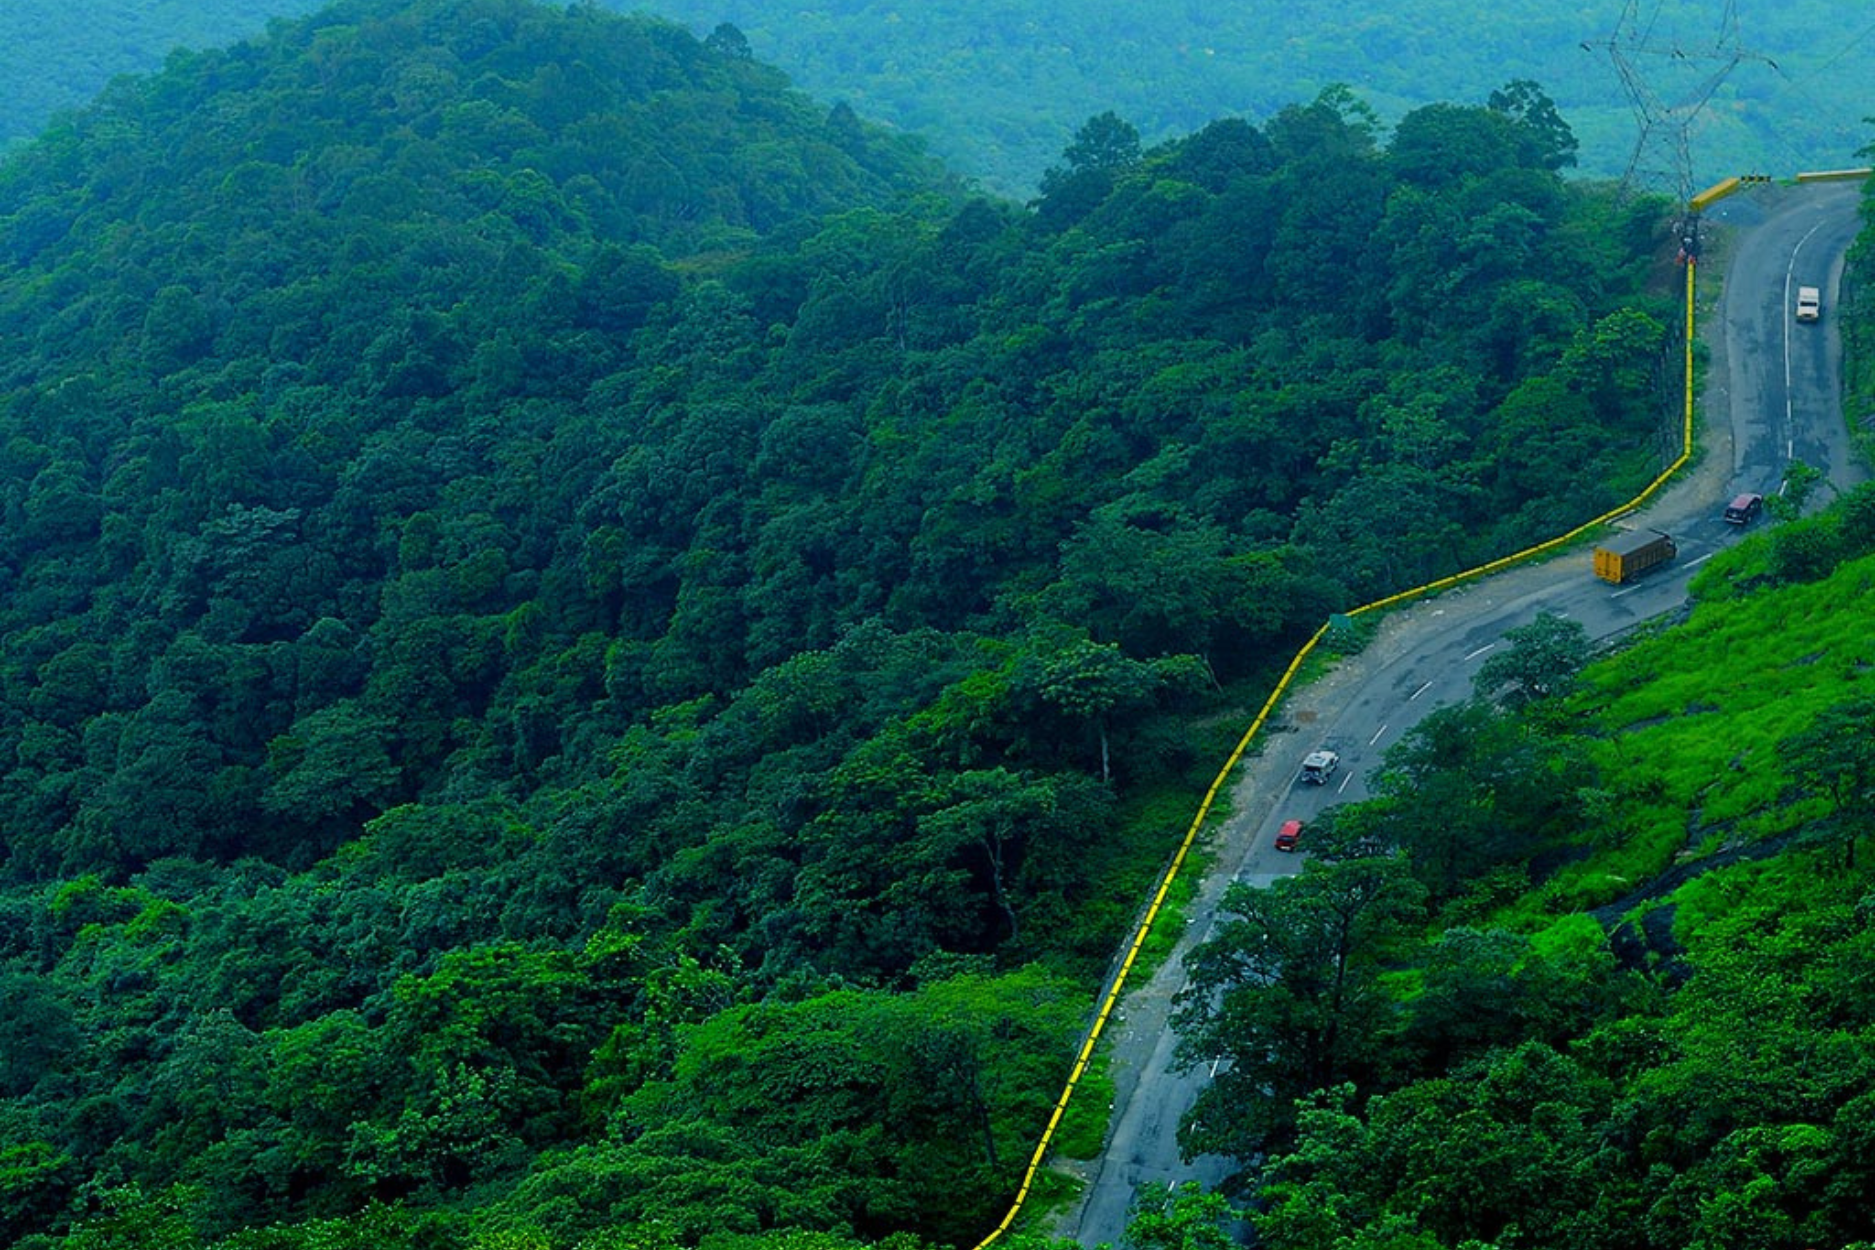 Wayanad: A Paradise of Lush Greenery and Cultural Riches